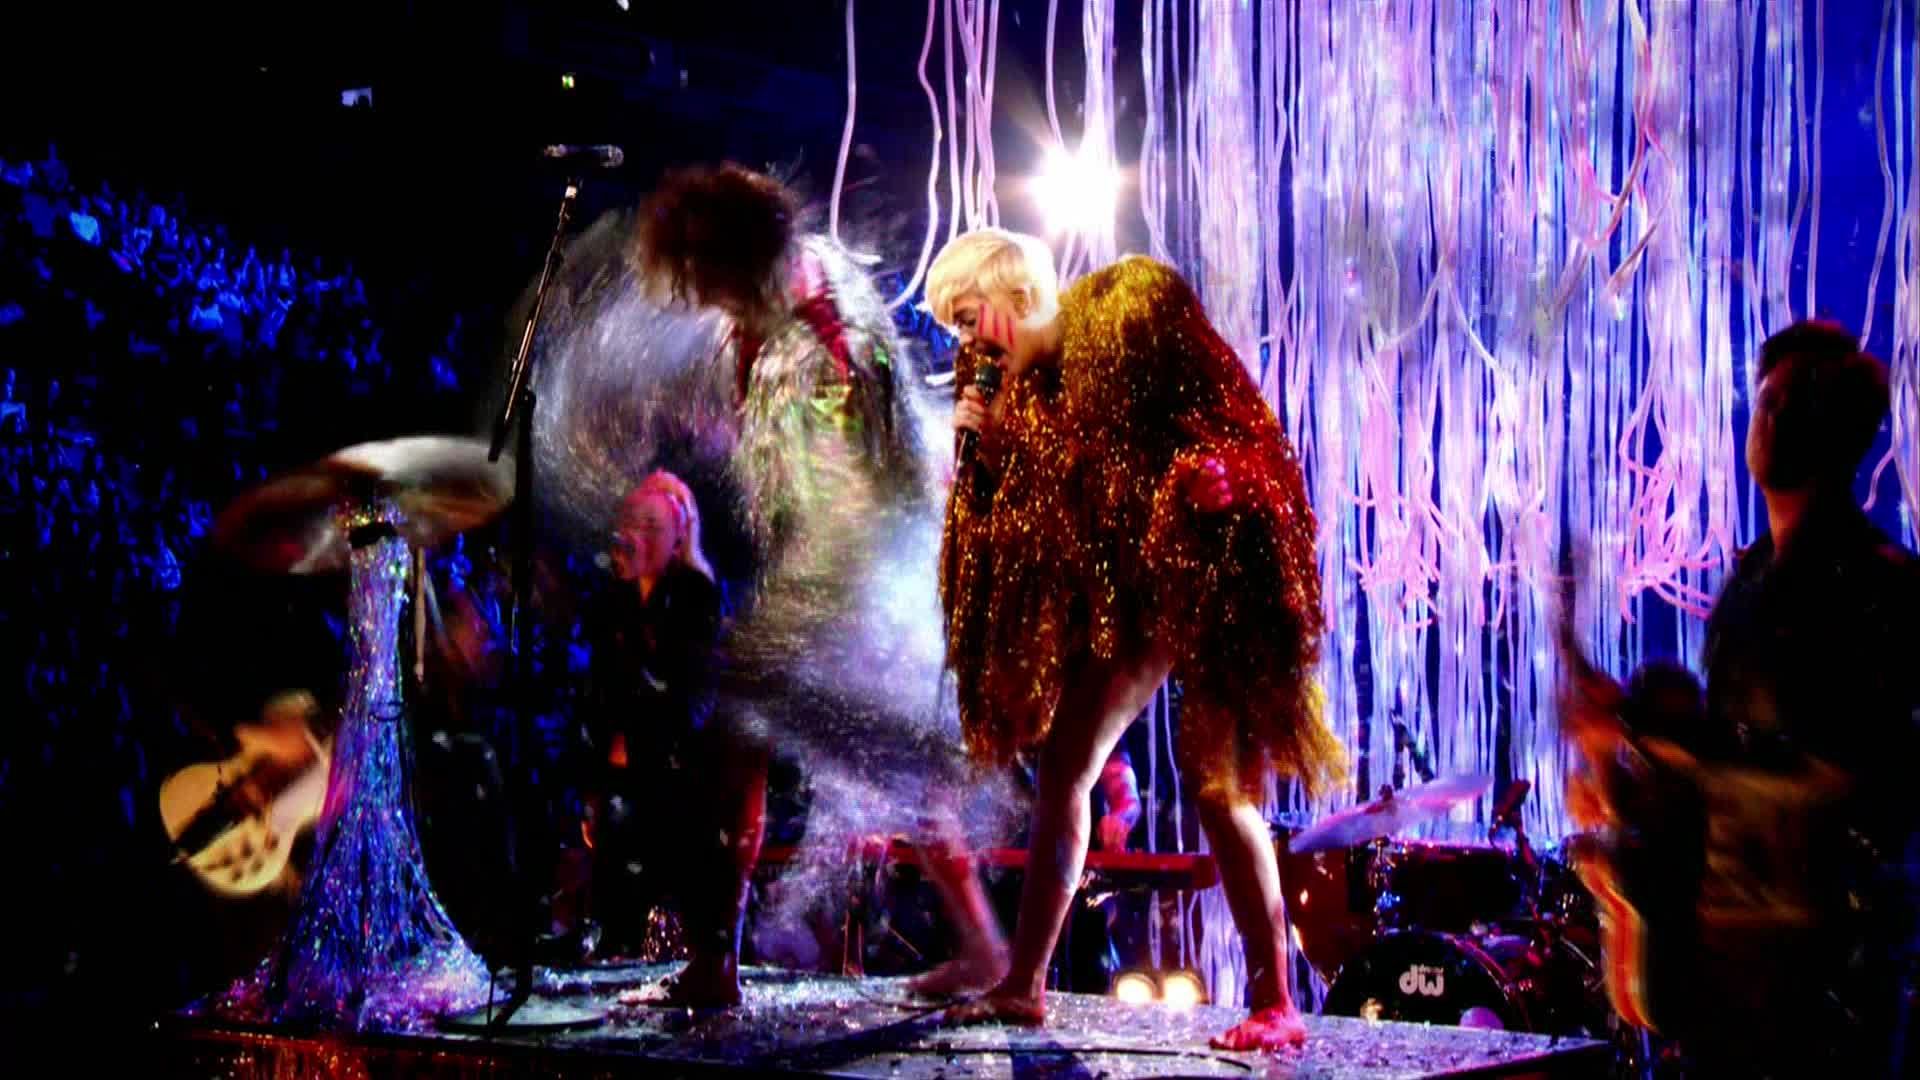 Miley Cyrus [ft The Flaming Lips] - 2014-05-18, Billboard Music Awards - 1080 TS - LSD preview 22